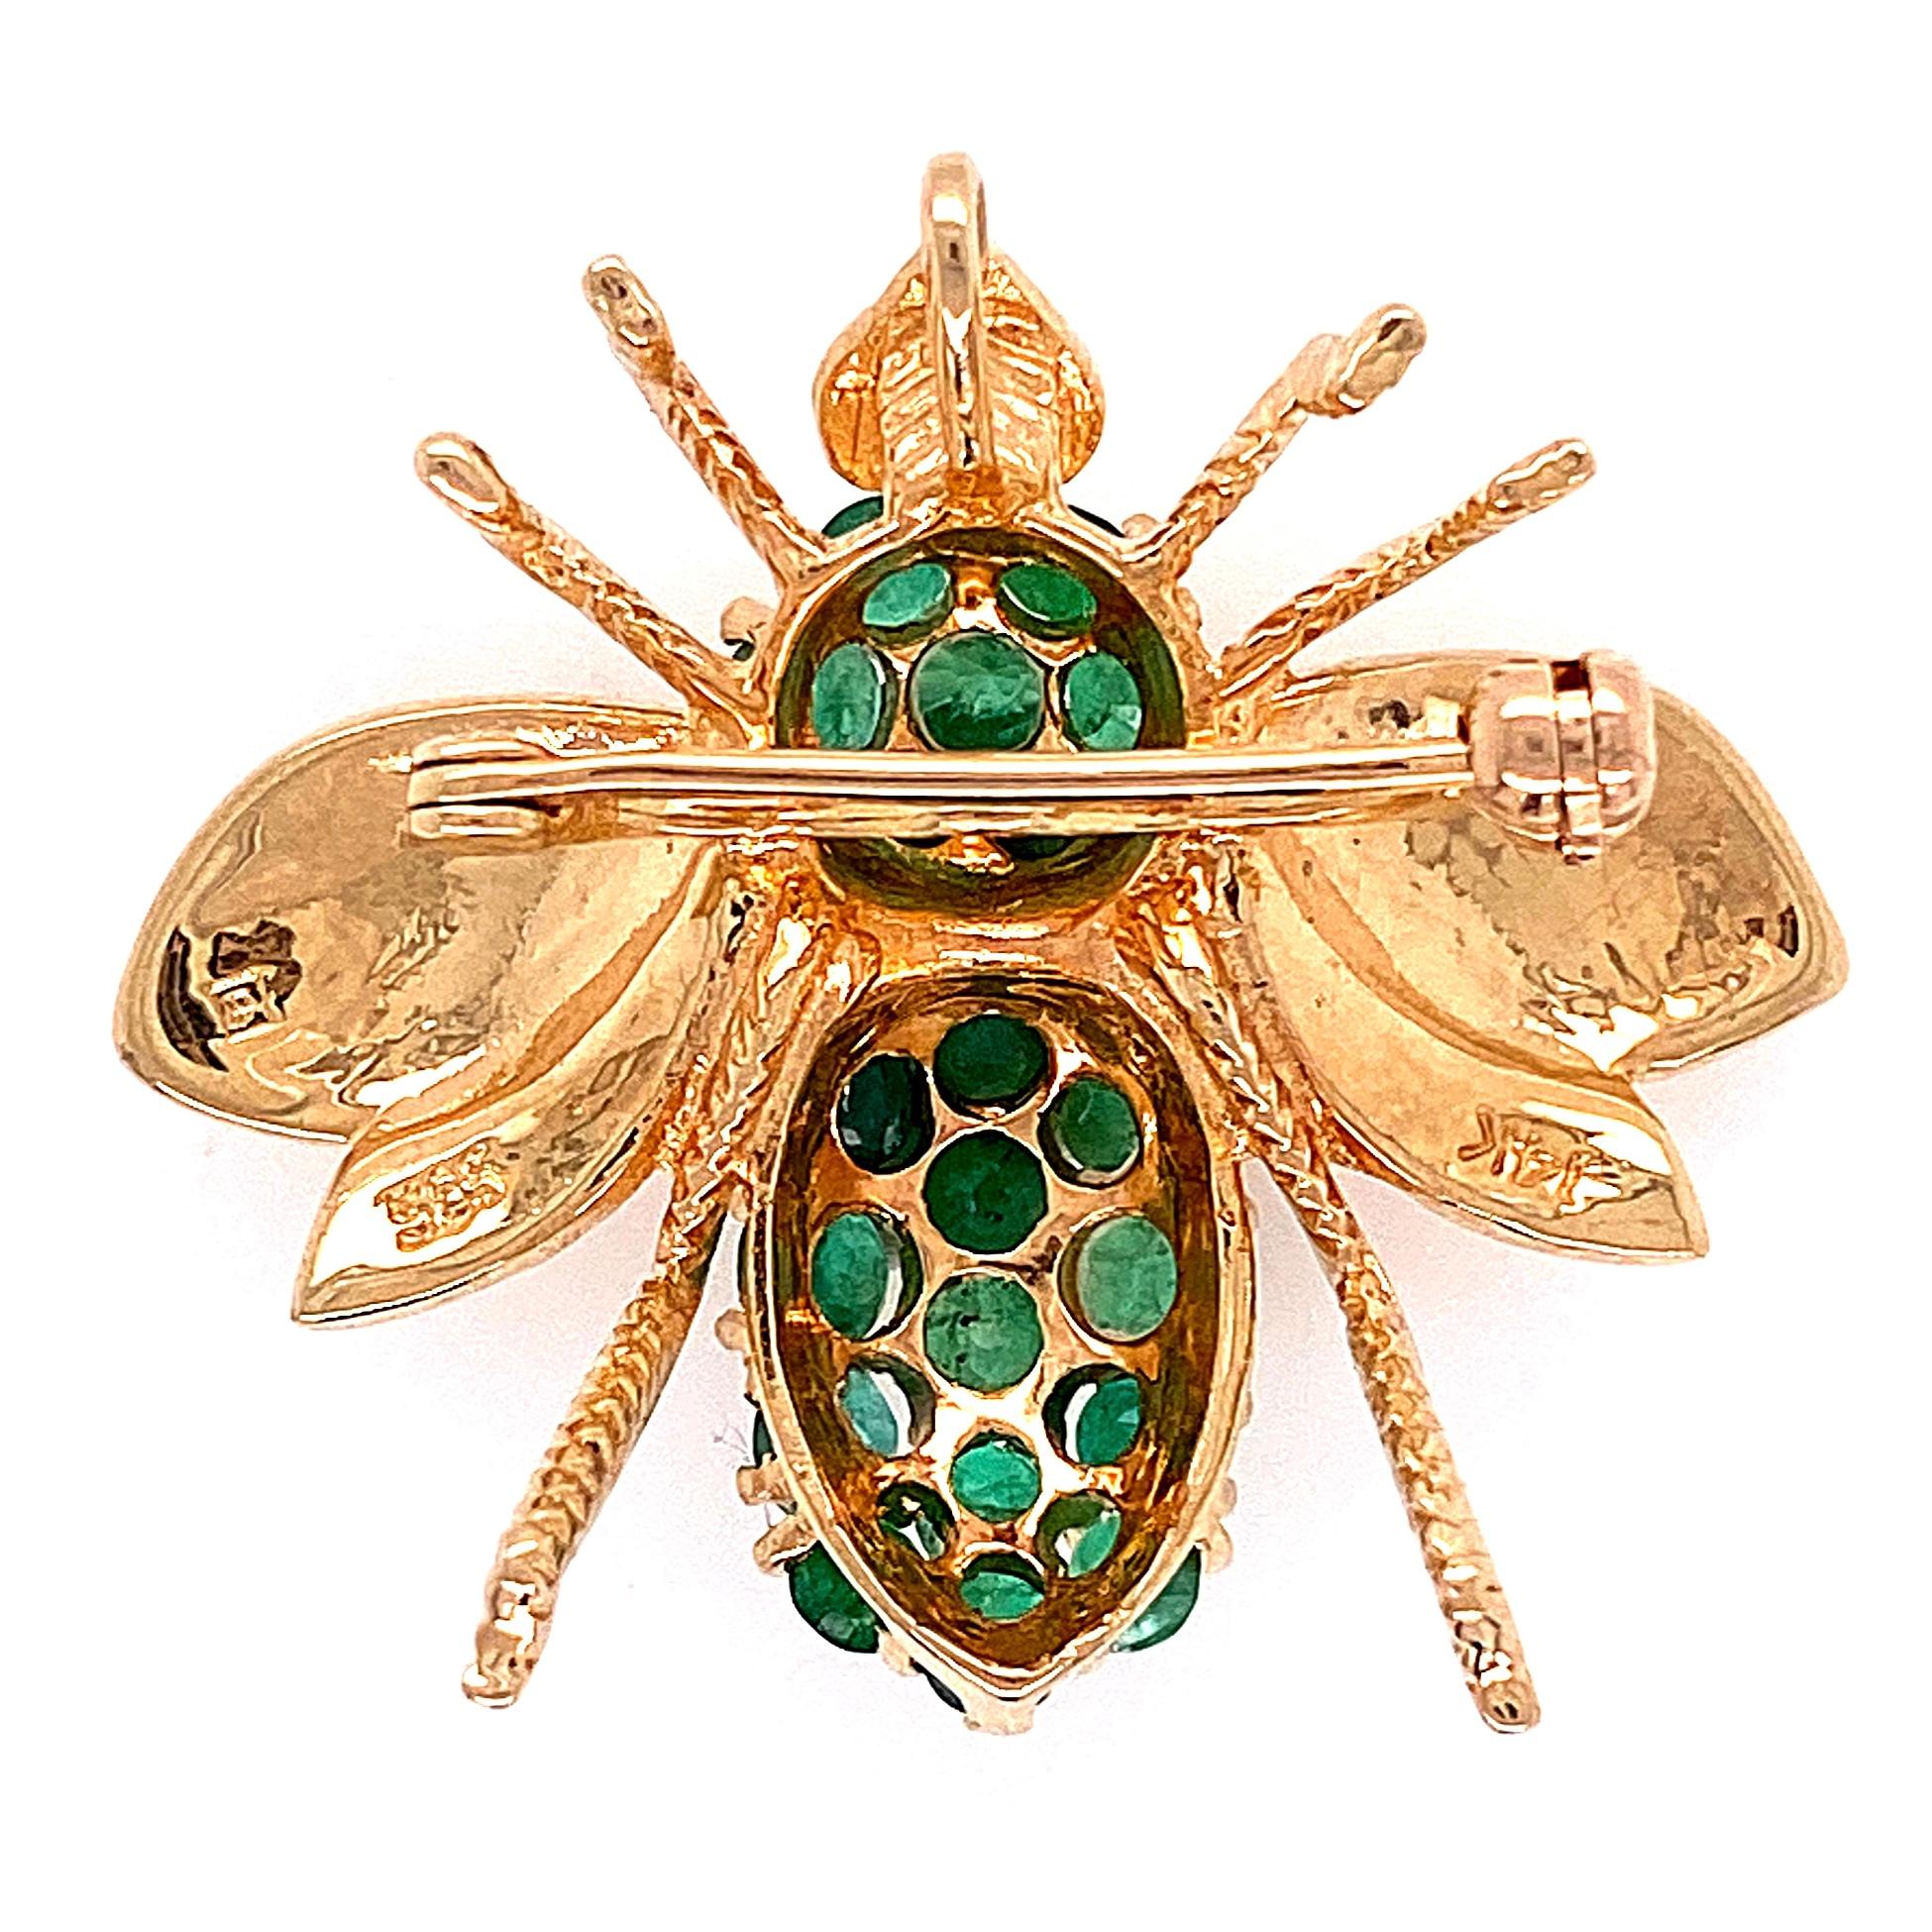 Simply Beautiful, Stylish and finely detailed Emerald Bee Brooch/Pendant. Hand crafted in 14 Karat yellow Gold  and hand set with Emeralds. The Pin is in excellent vintage condition and recently professionally cleaned and polished. Much more